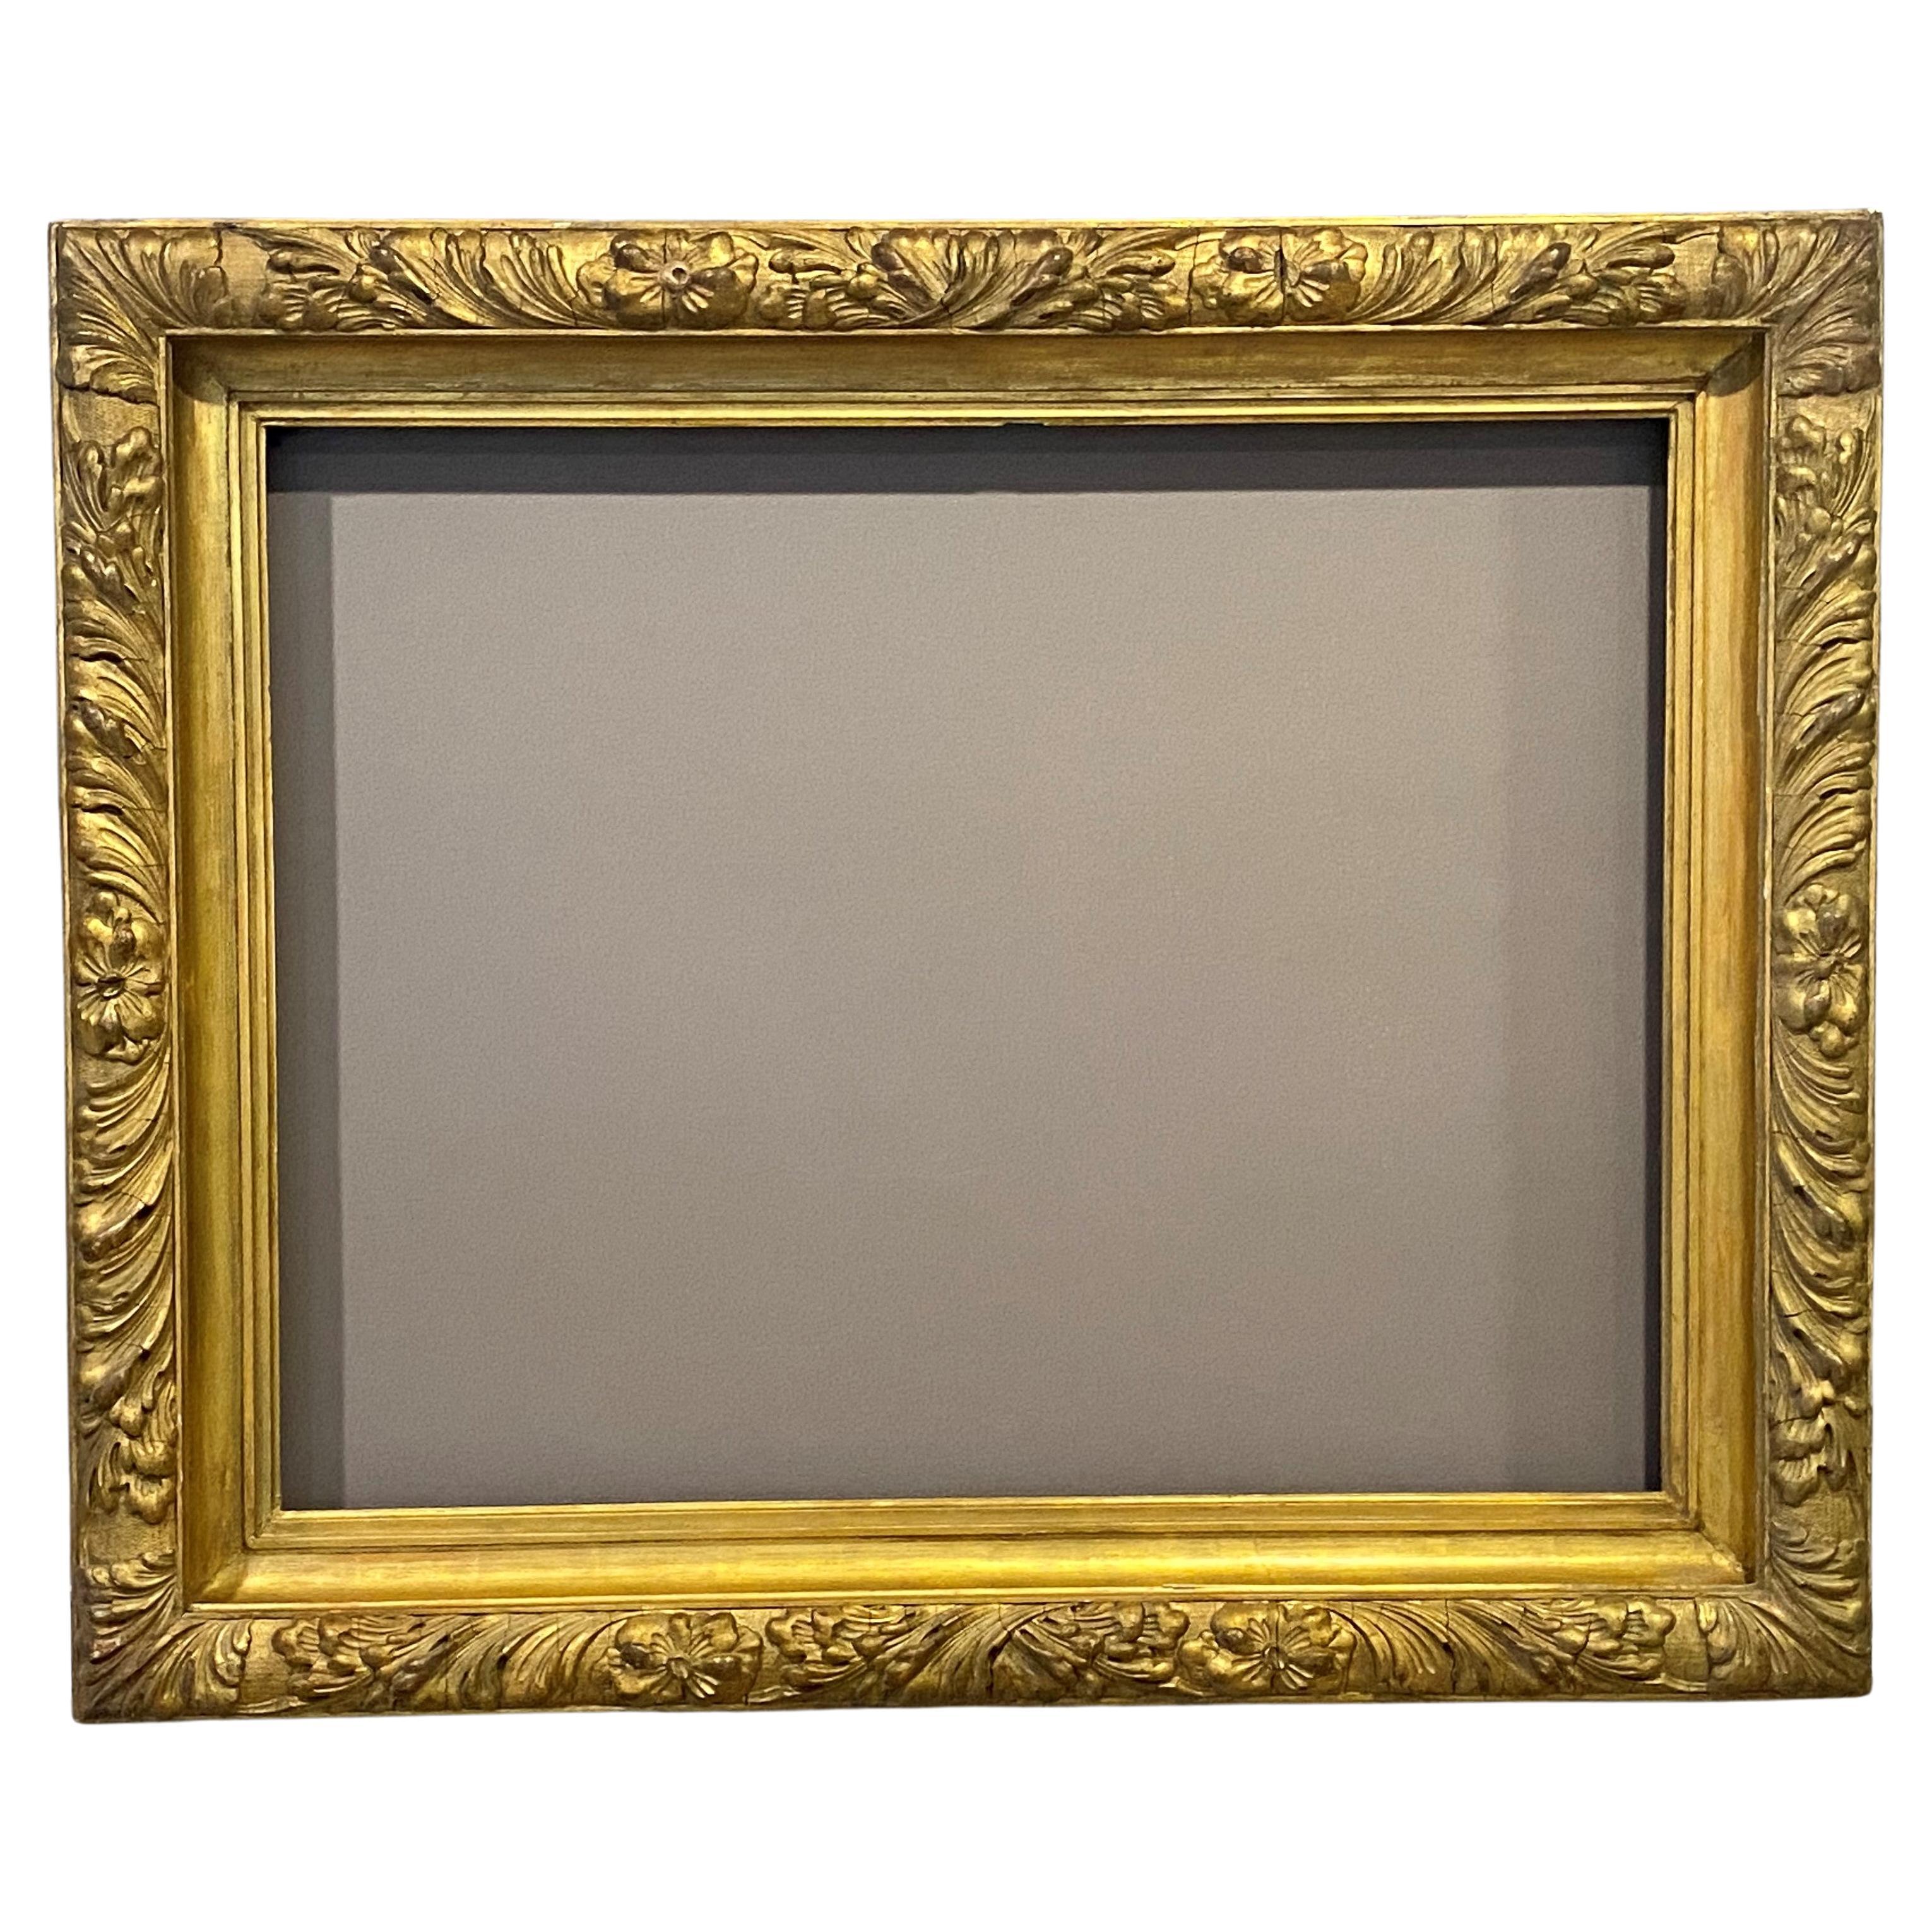 Beaux Arts Gold Leaf and Gesso Frame, likely British, circa 1880-90